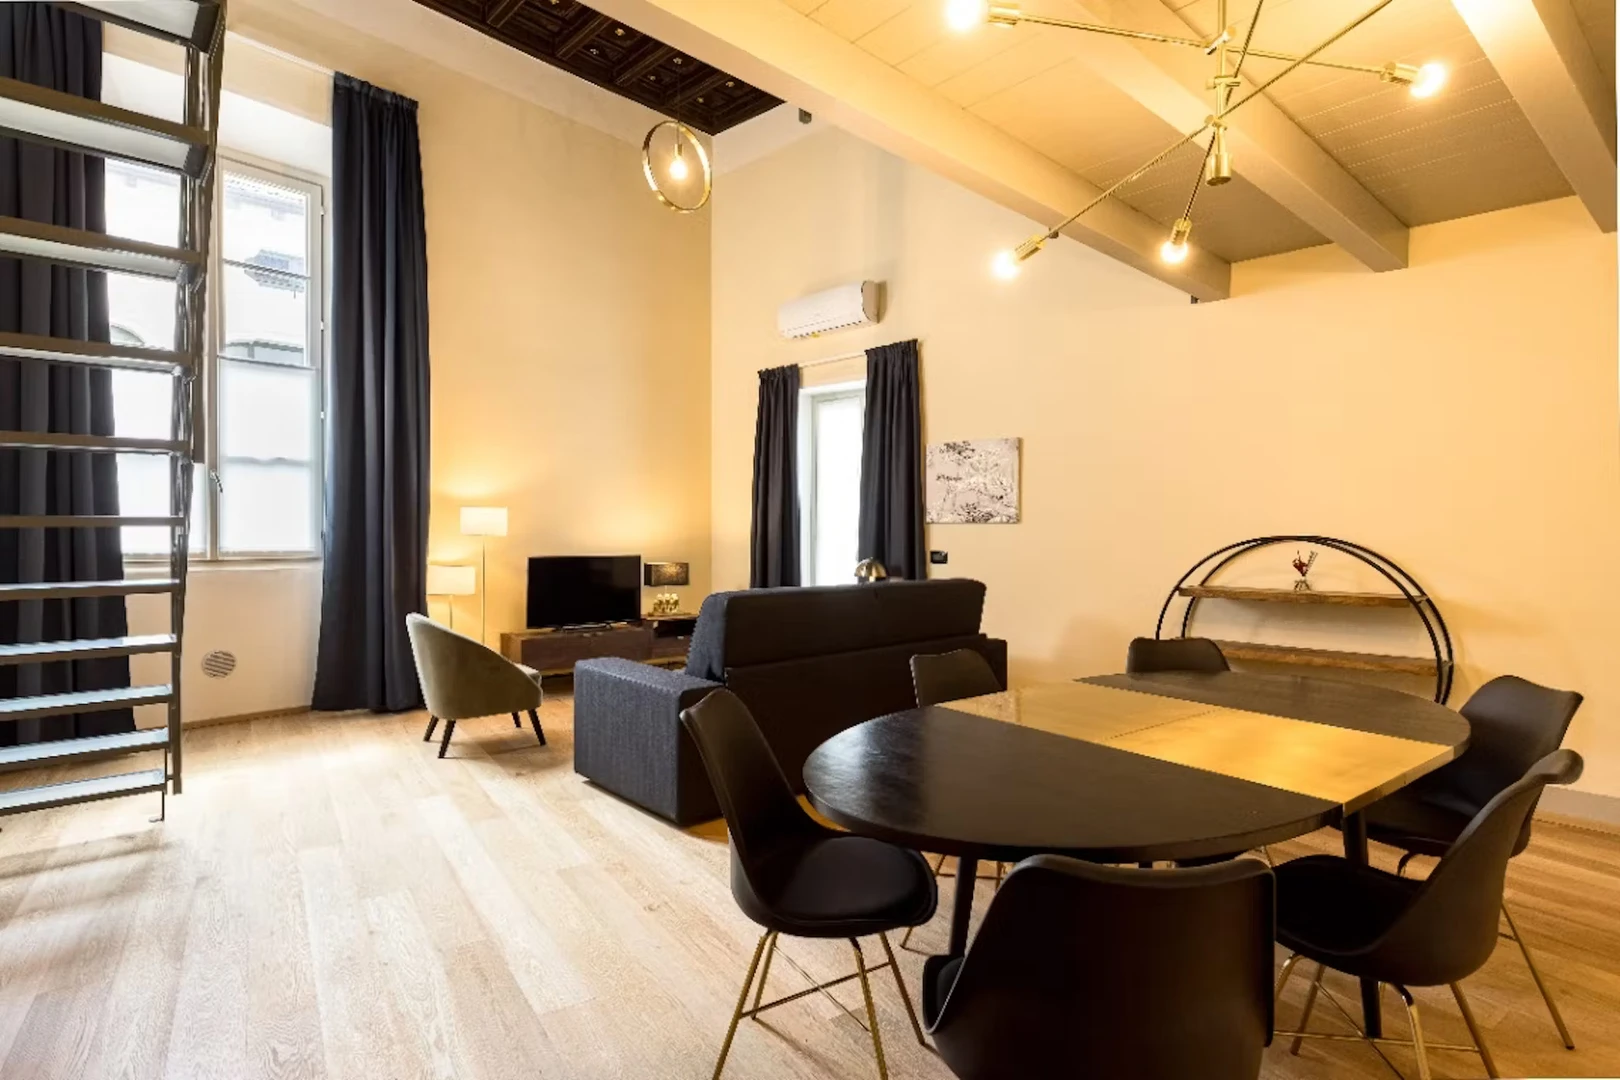 Accommodation in the centre of Como